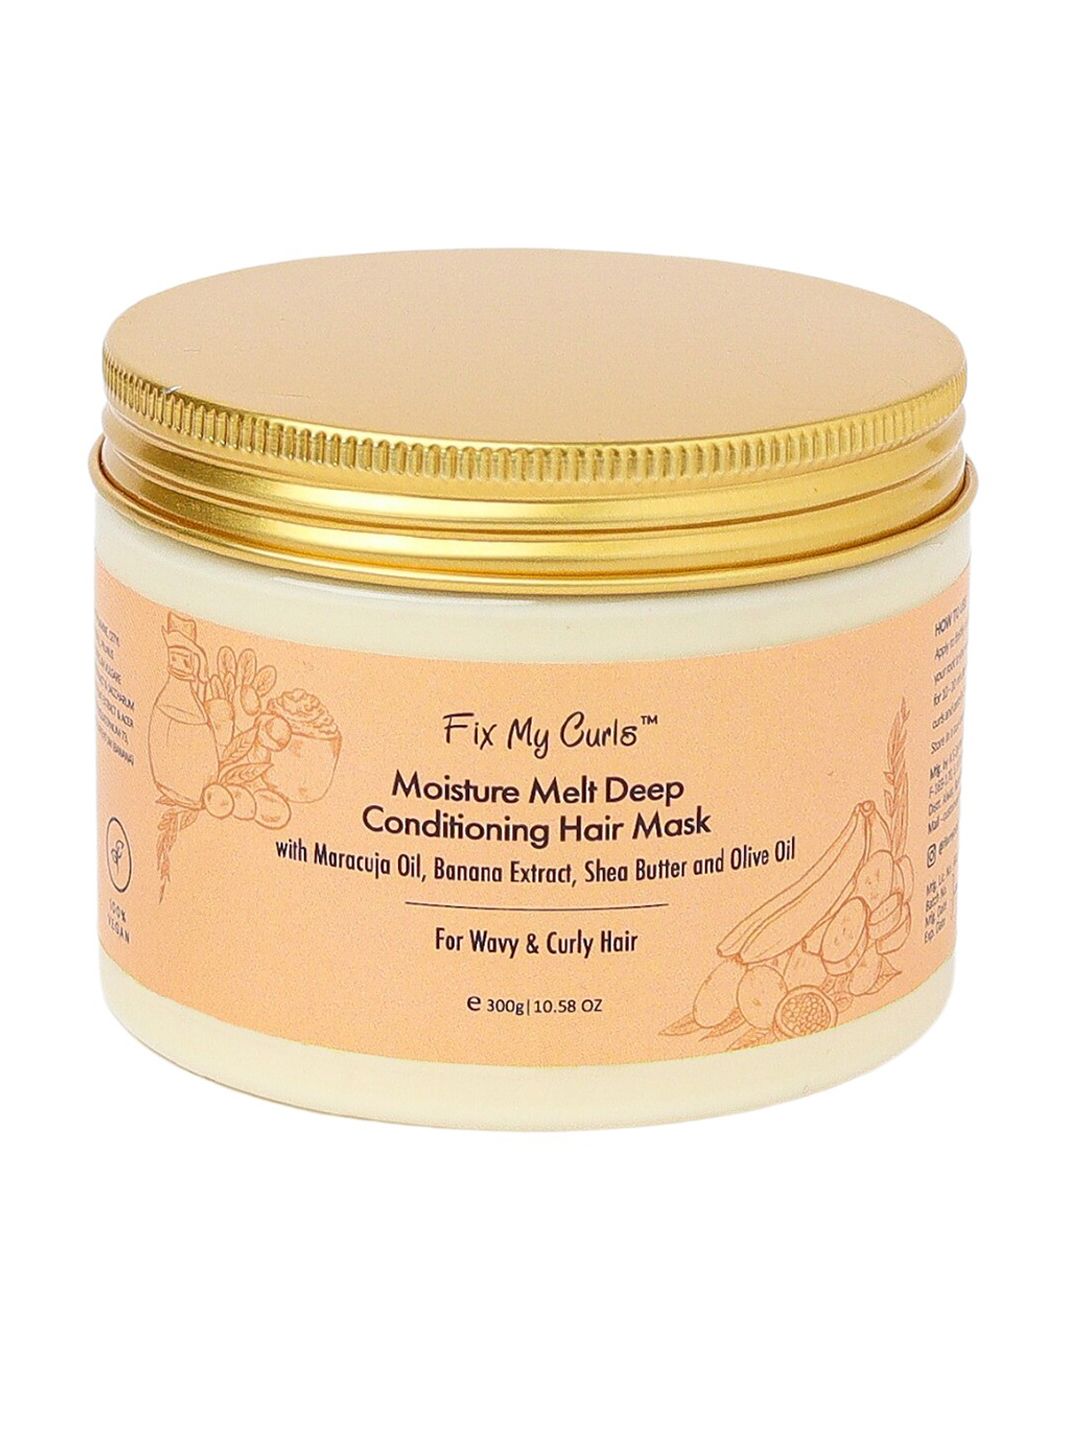 Fix My Curls Moisture Melt Deep Conditioning Hair Mask 300g Price in India